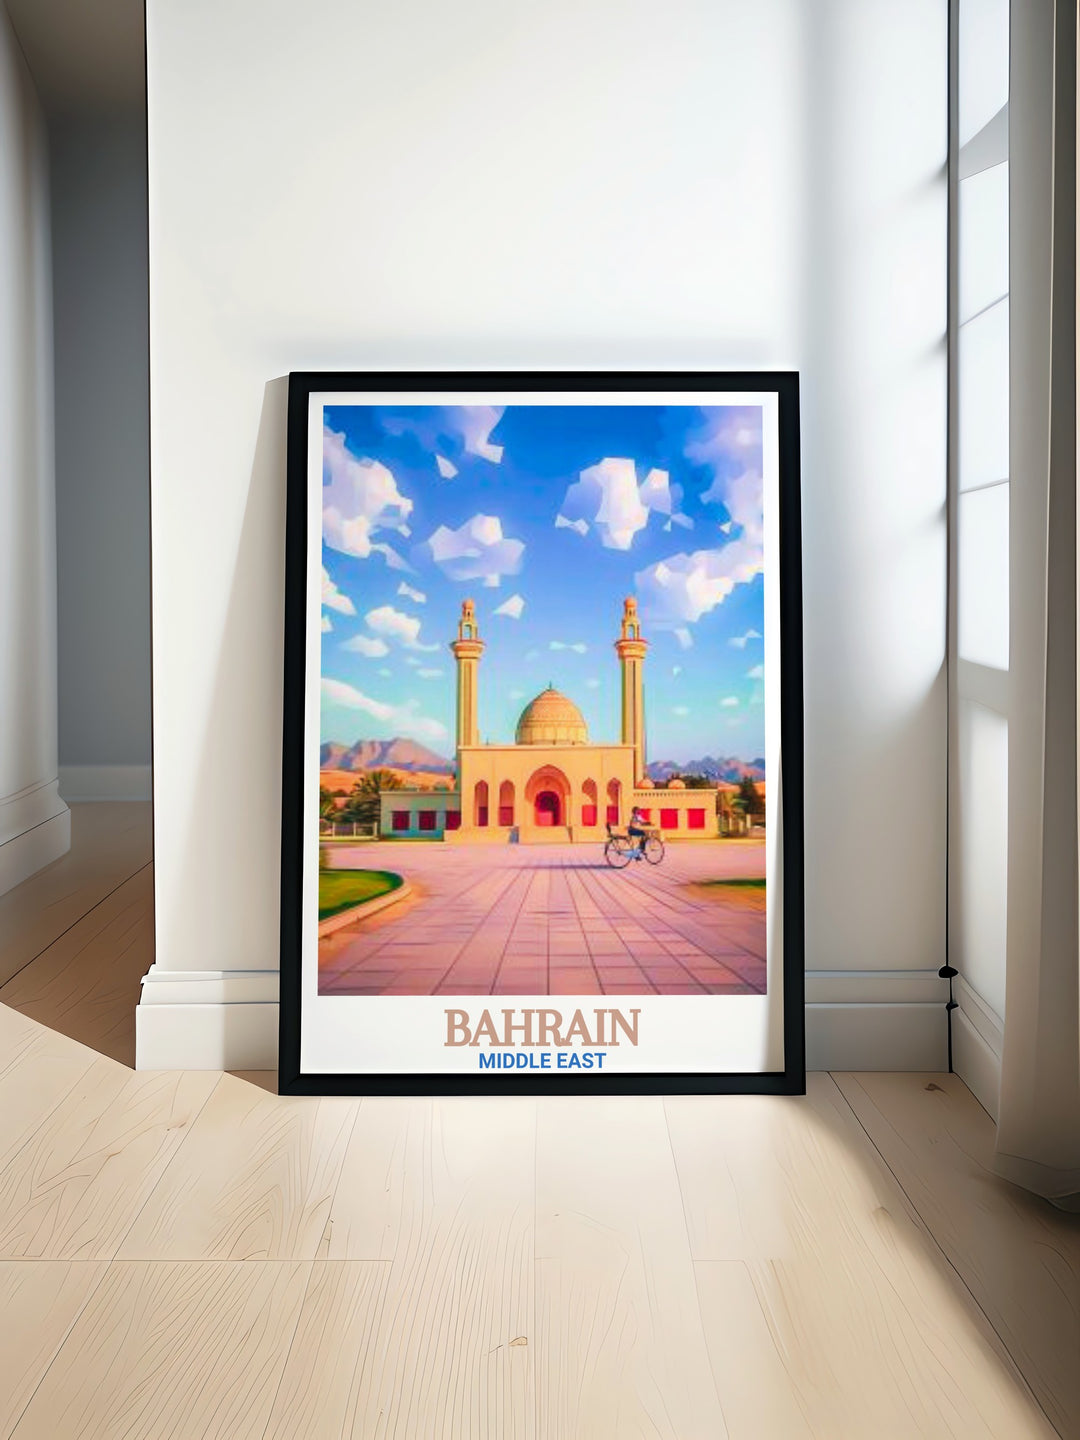 Bahrain Print featuring Al Fateh Grand Mosque in vibrant colors perfect for wall decor or a travel souvenir bringing the beauty and heritage of Bahrain into your home with stunning artwork and meticulous craftsmanship.